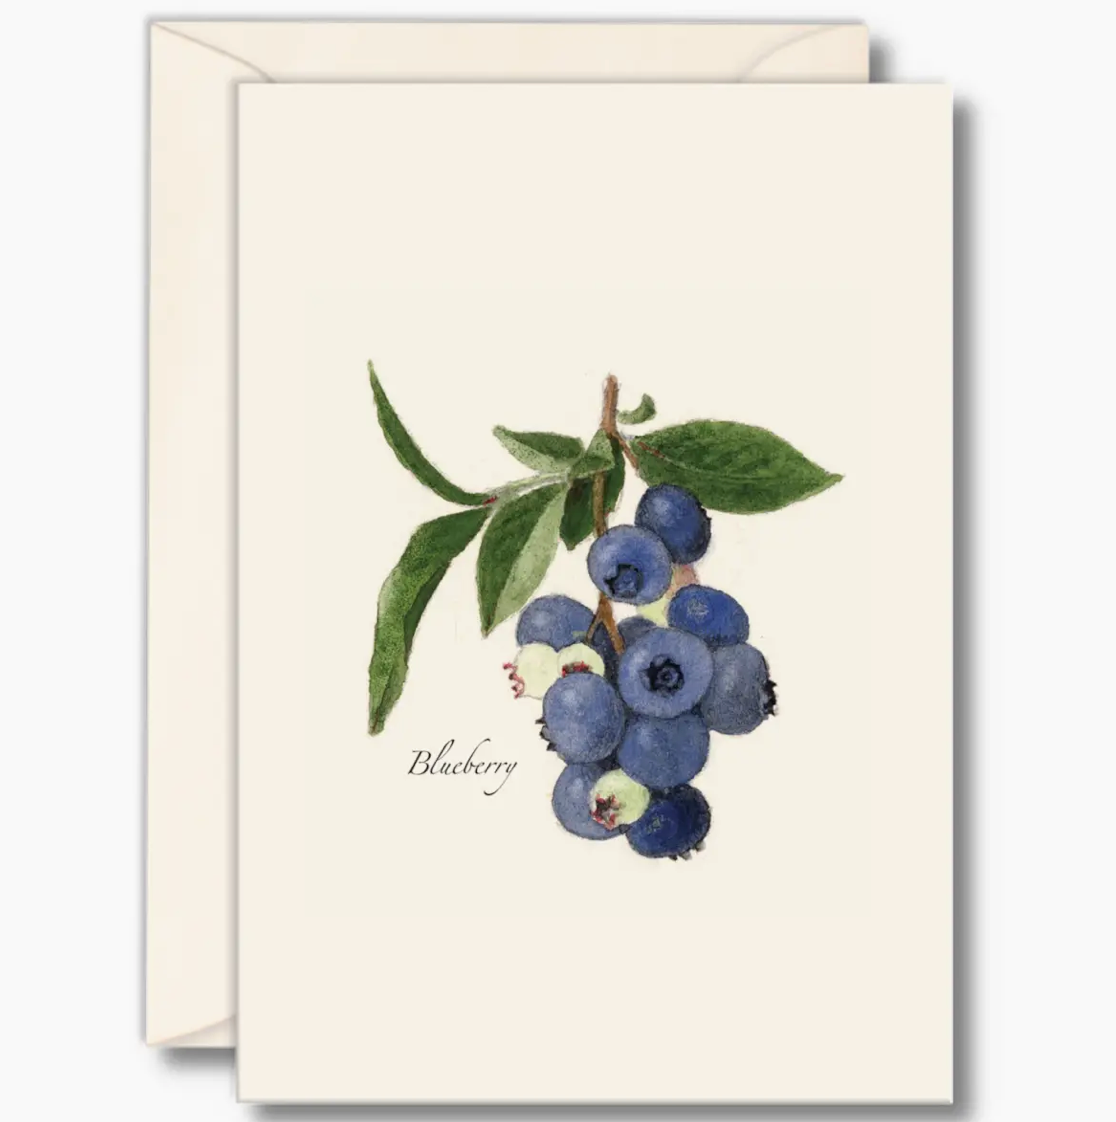 Blueberry Notecards with Matching Envelopes - Set of 8